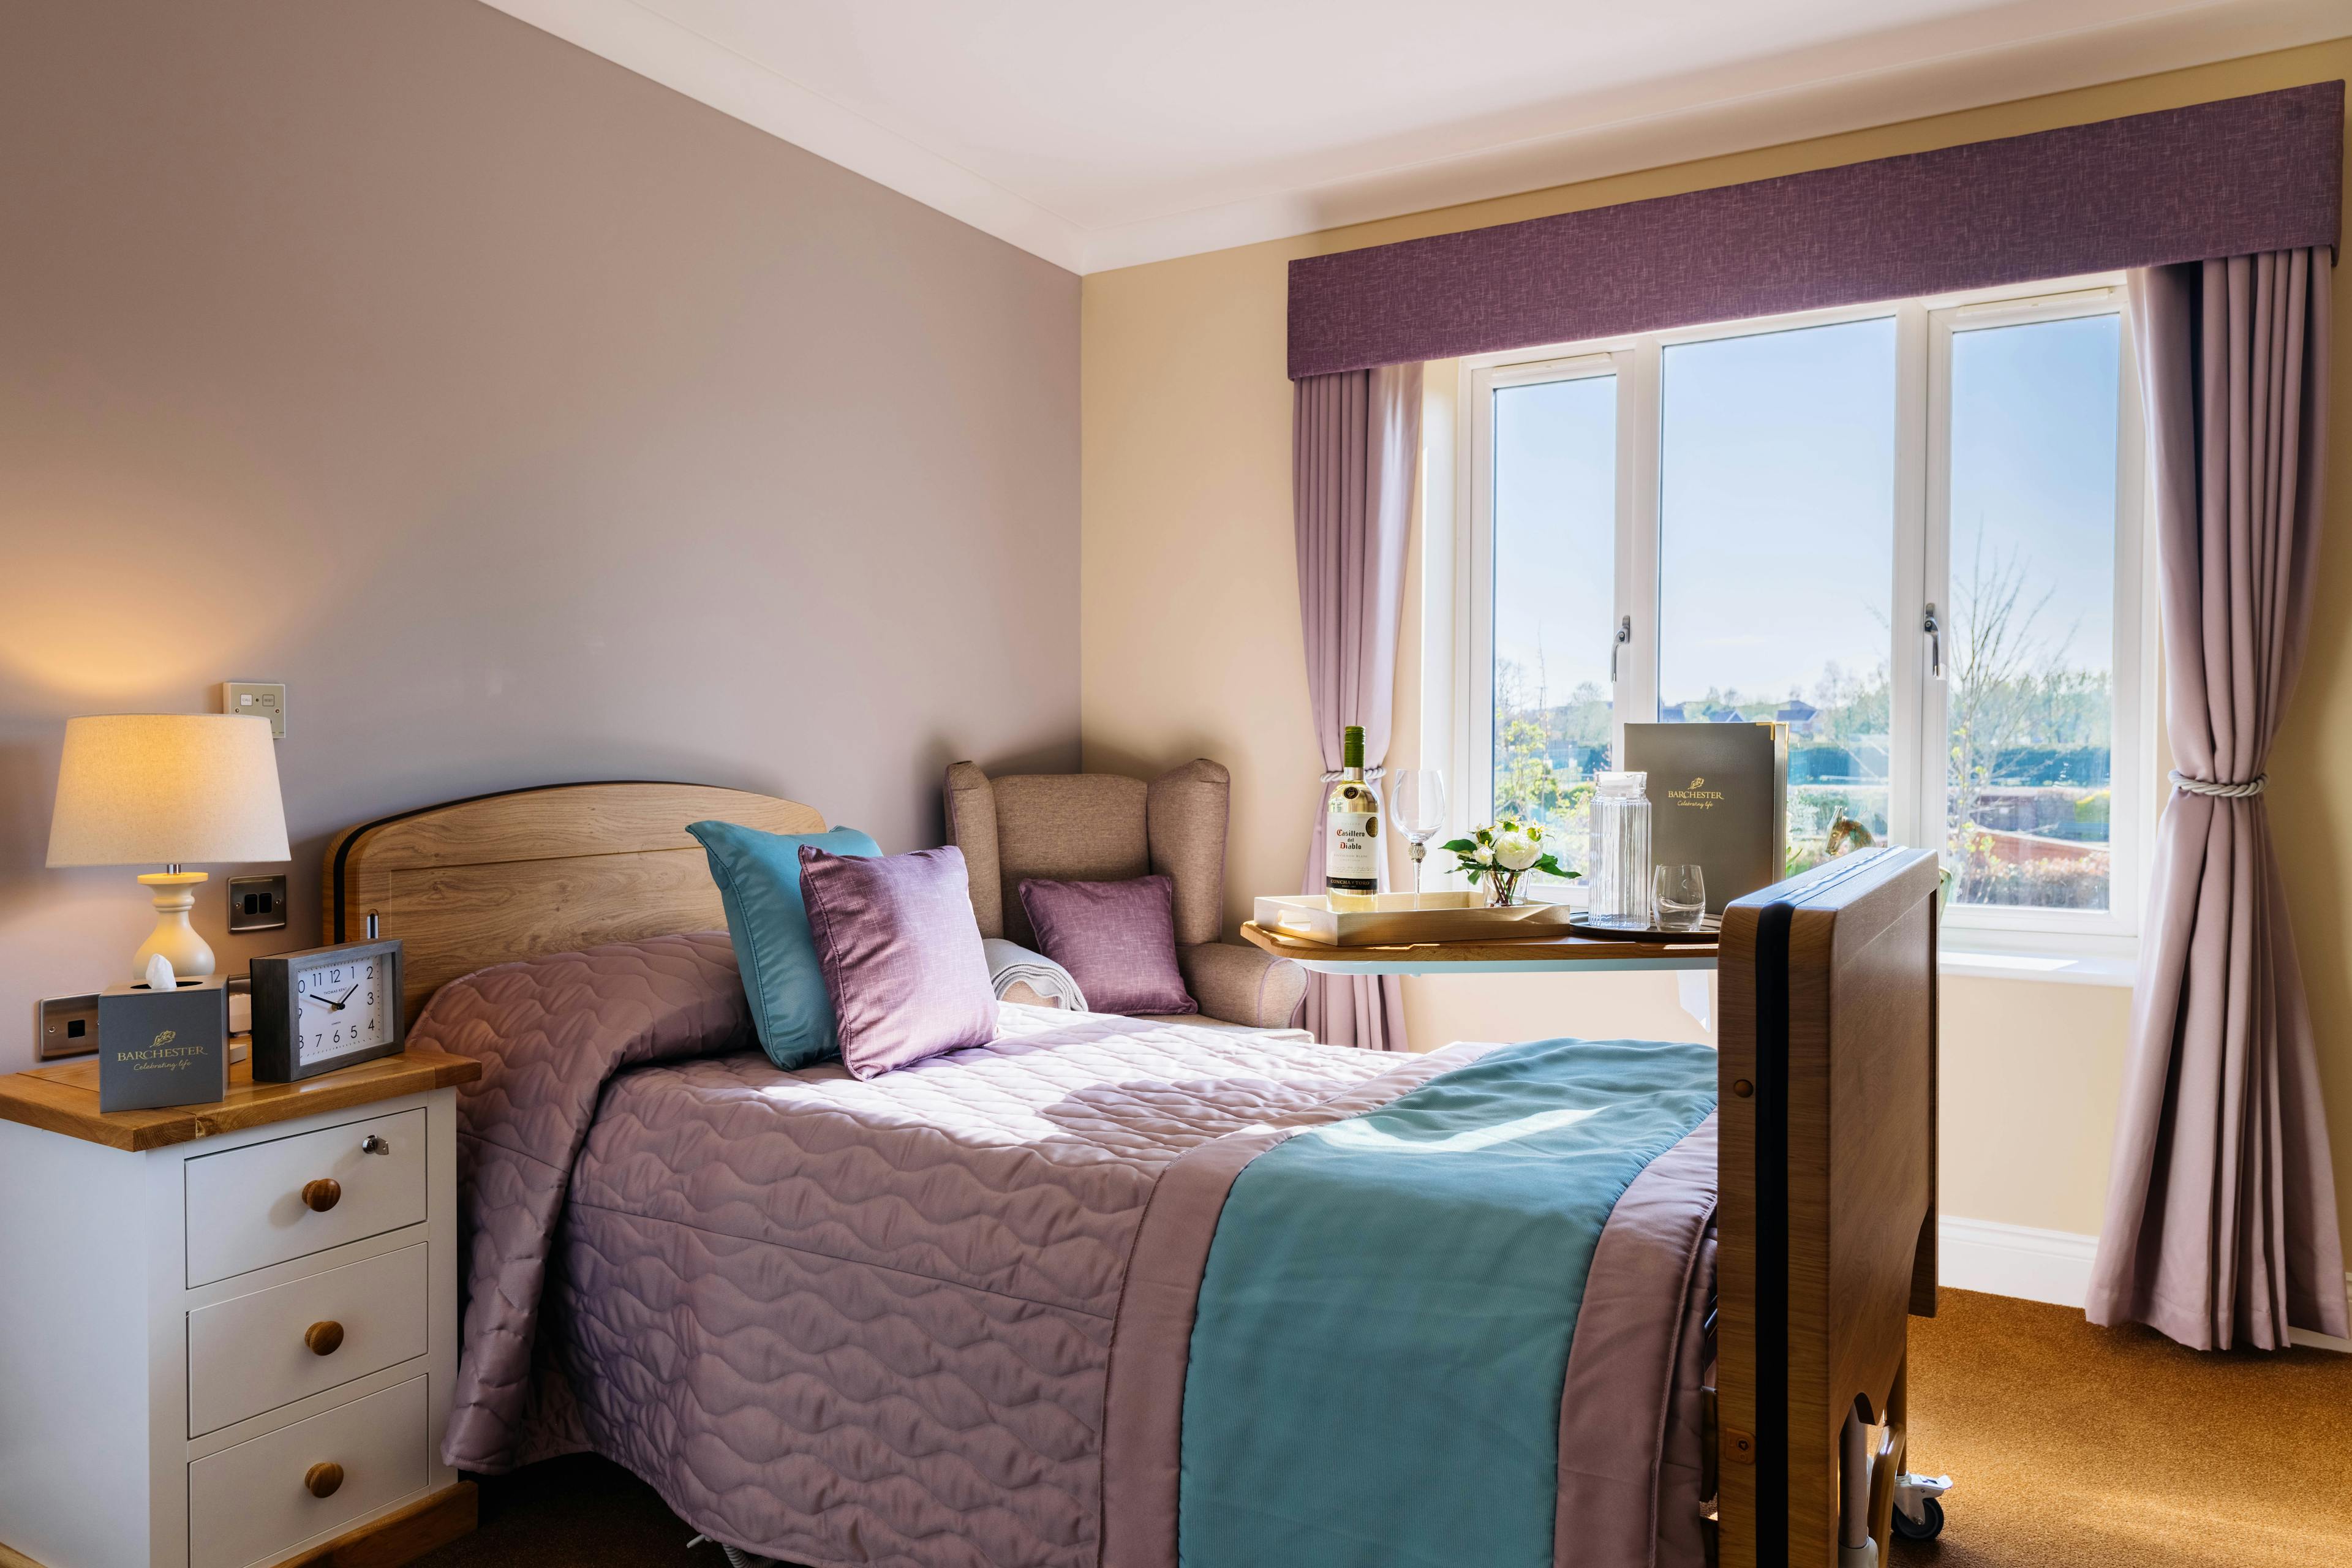 Bedroom at Snowdrop Place Care Home in Southampton, Hampshire